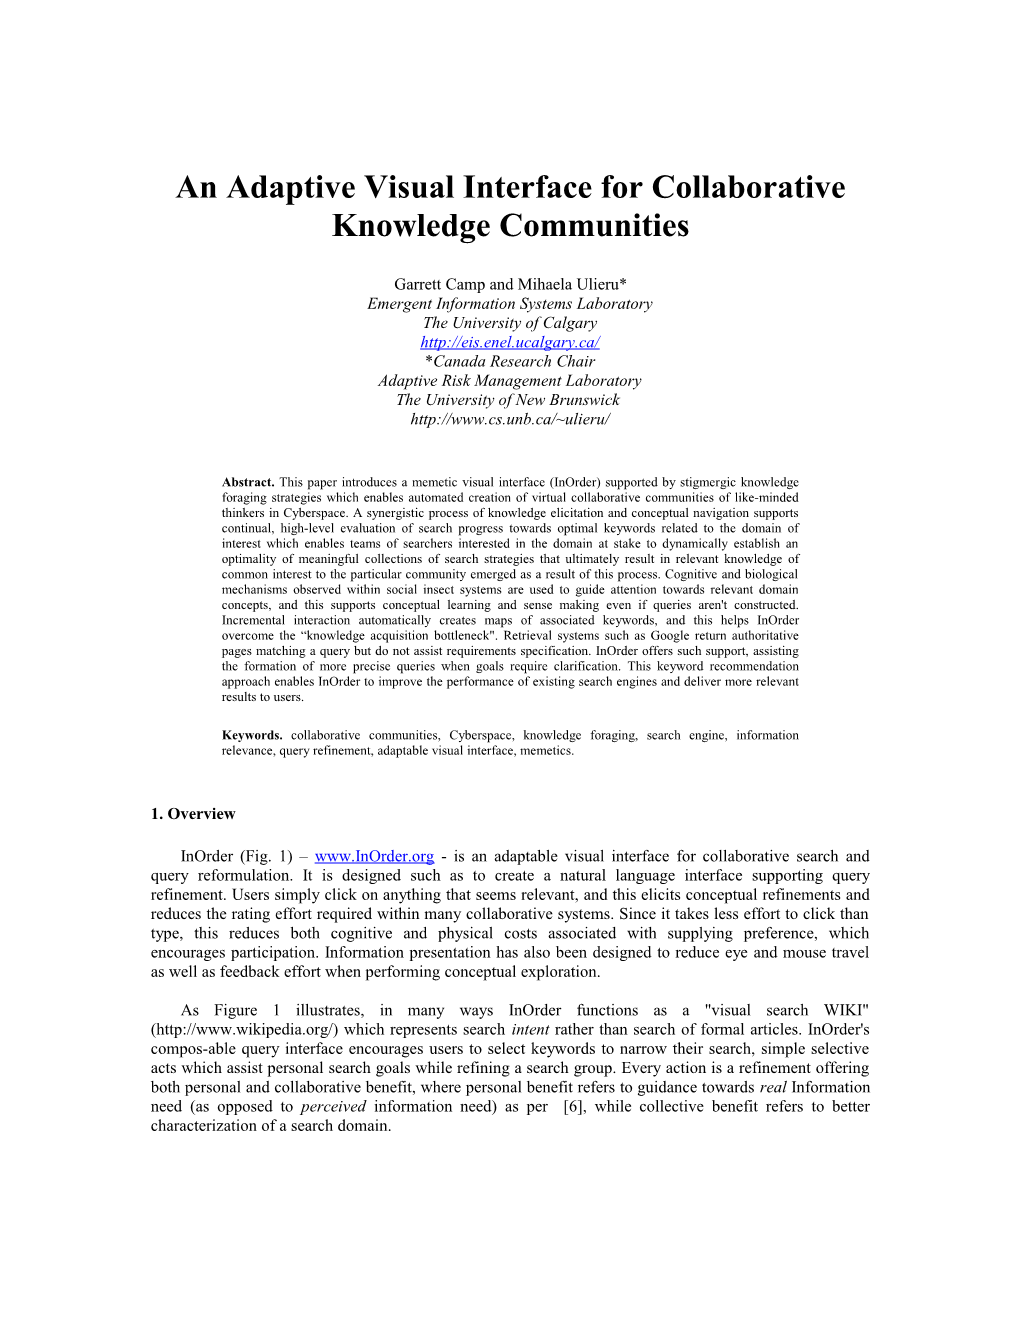 An Adaptive Visual Interface for Collaborative Knowledge Communities